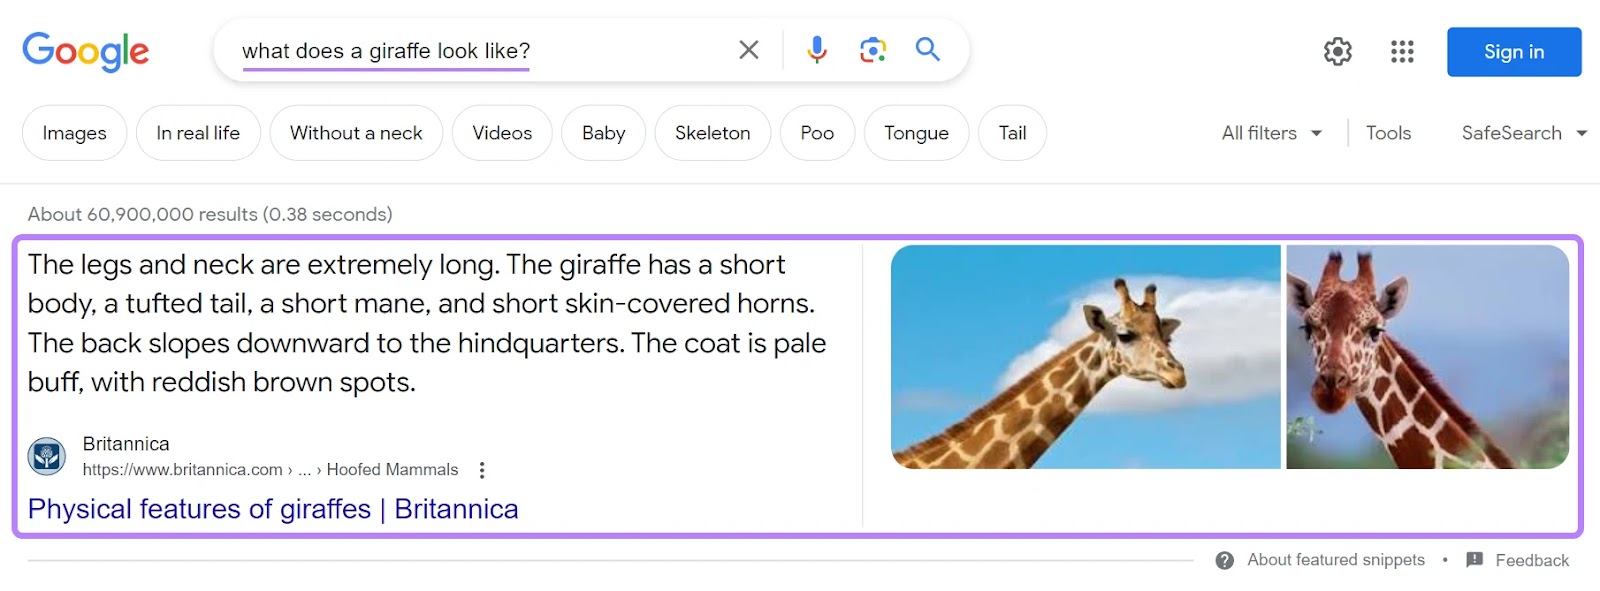 A featured snippet connected  Google's SERP for "what does a giraffe look   like" query